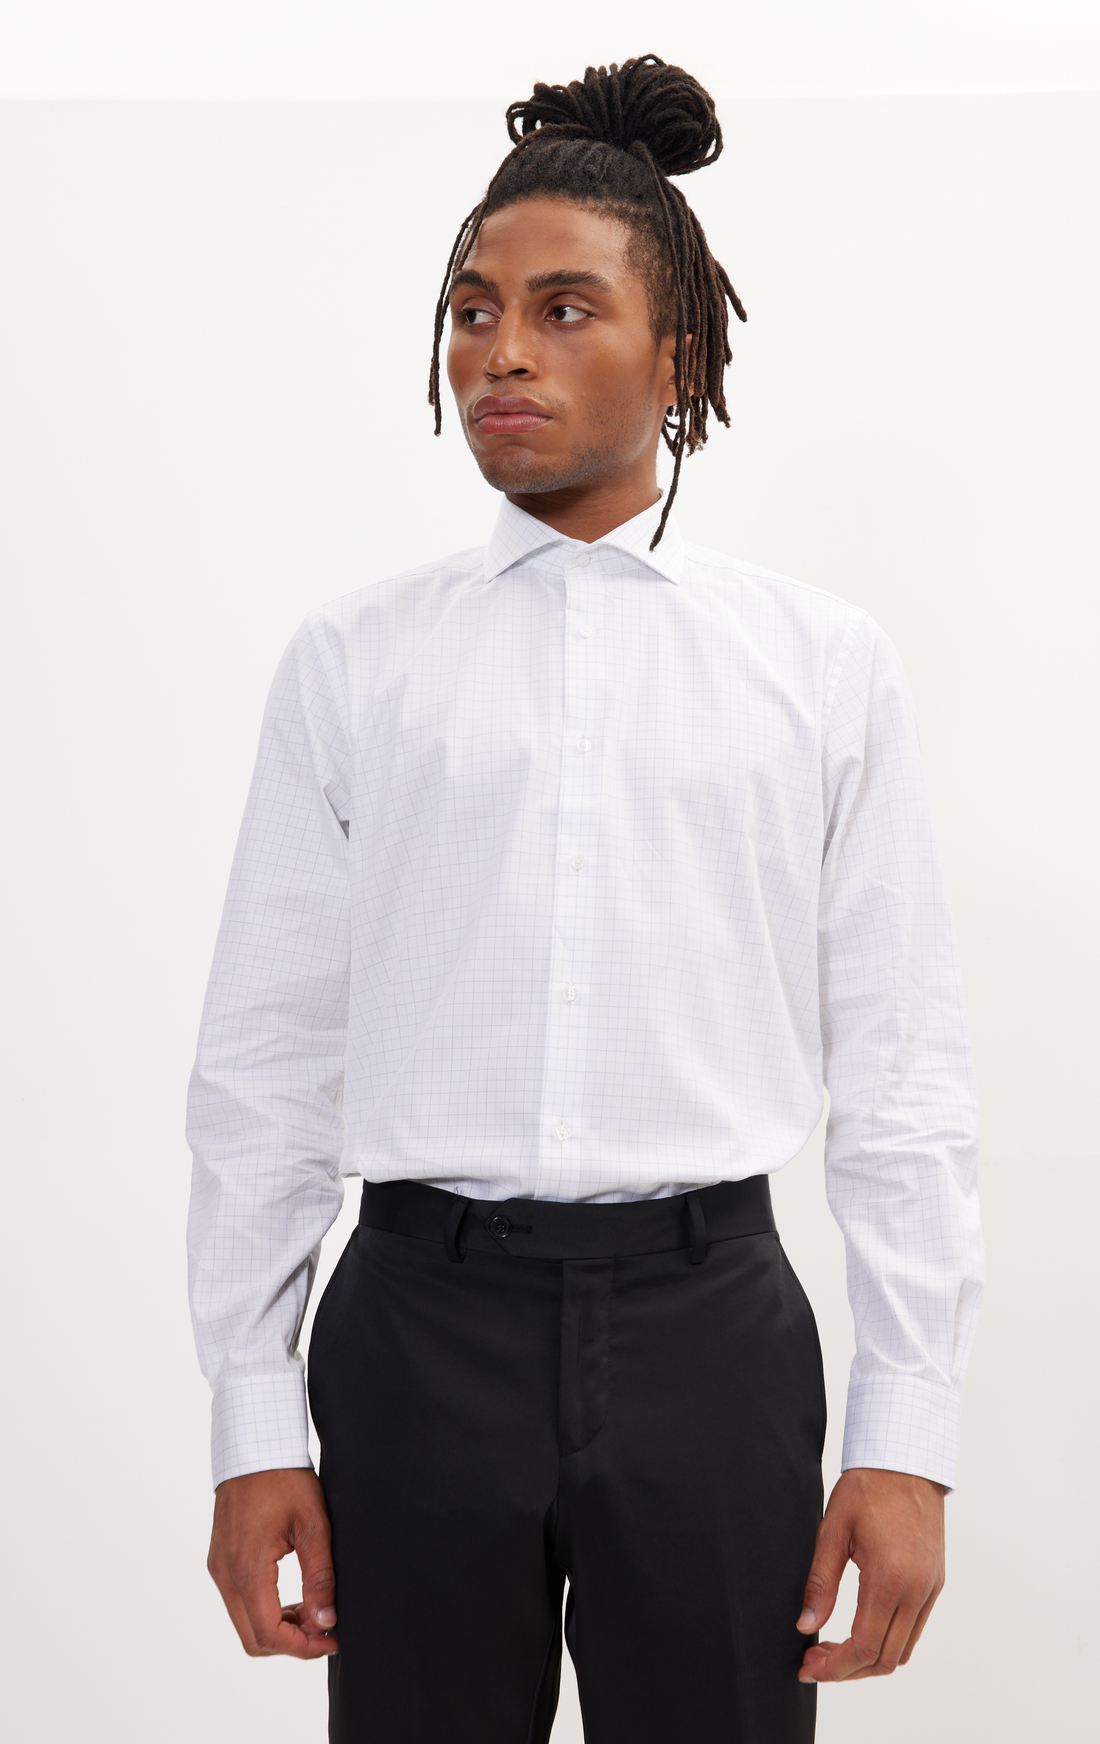 N° AN4903 PURE COTTON FRENCH PLACKET SPREAD COLLAR DRESS SHIRT - WHITE GRAPH